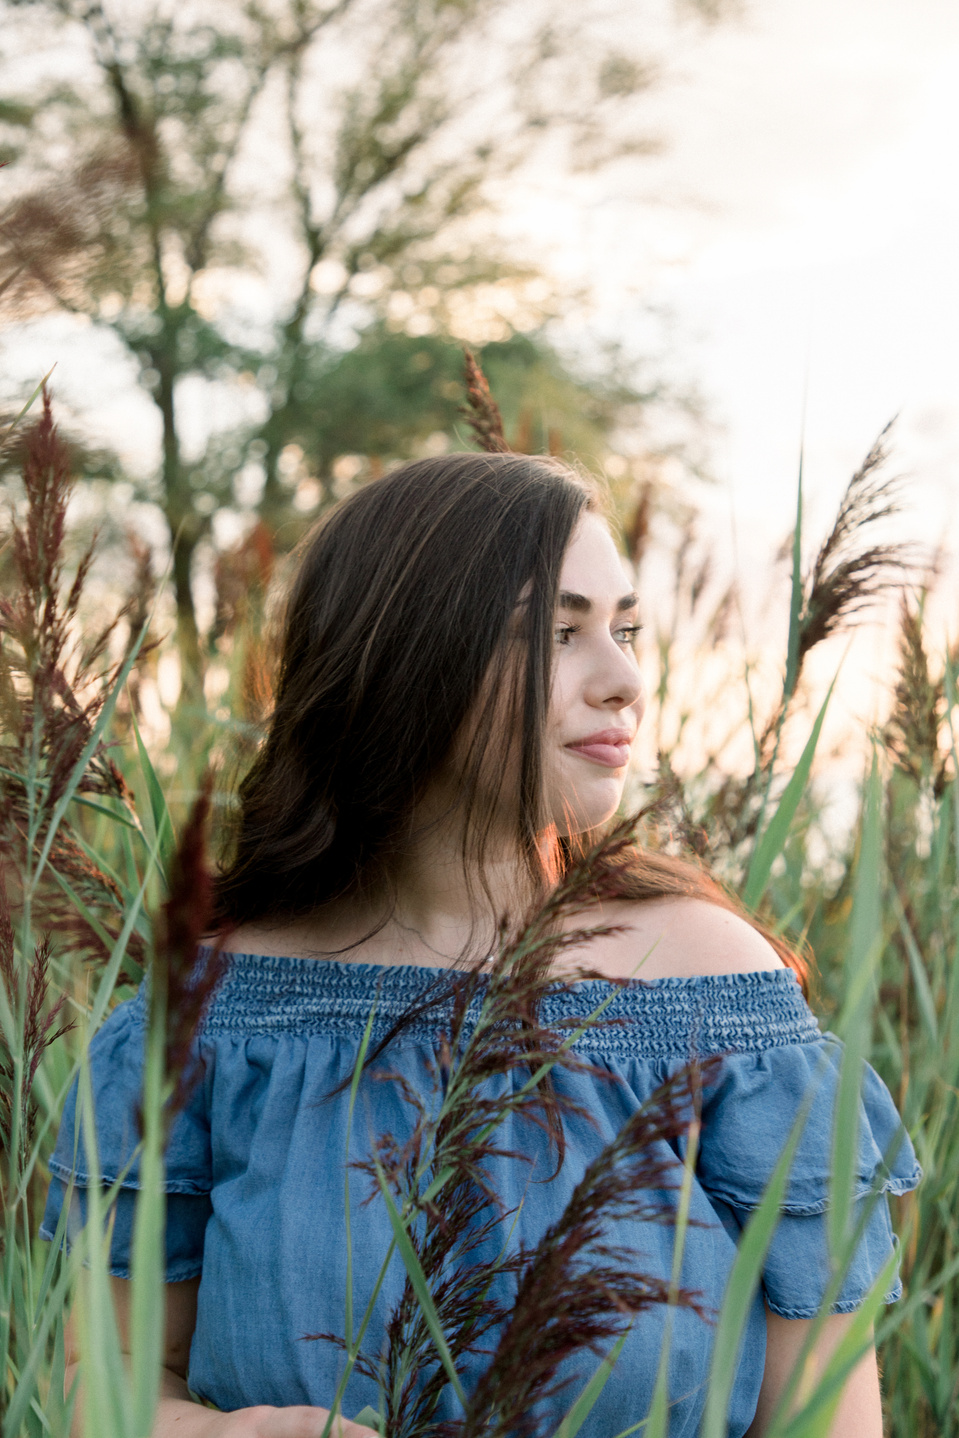 Full portrait of woman amongst tall grass, looking off into the distance. Niagara portrait photography, Niagara portrait photographer, Niagara branding photography, Niagara branding photographer.